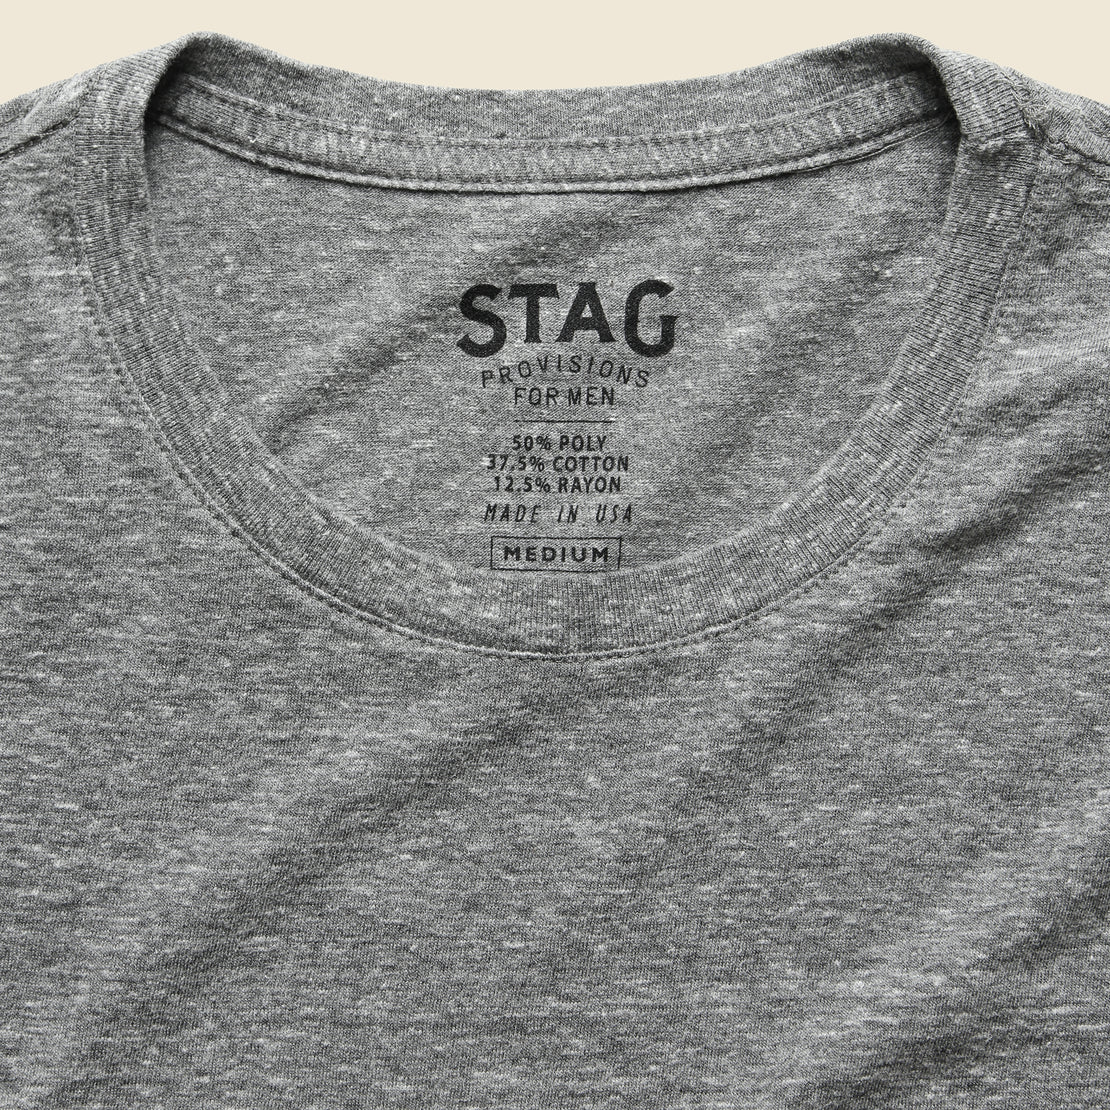 Pocket Tee - Grey - STAG - STAG Provisions - Tops - S/S Tee